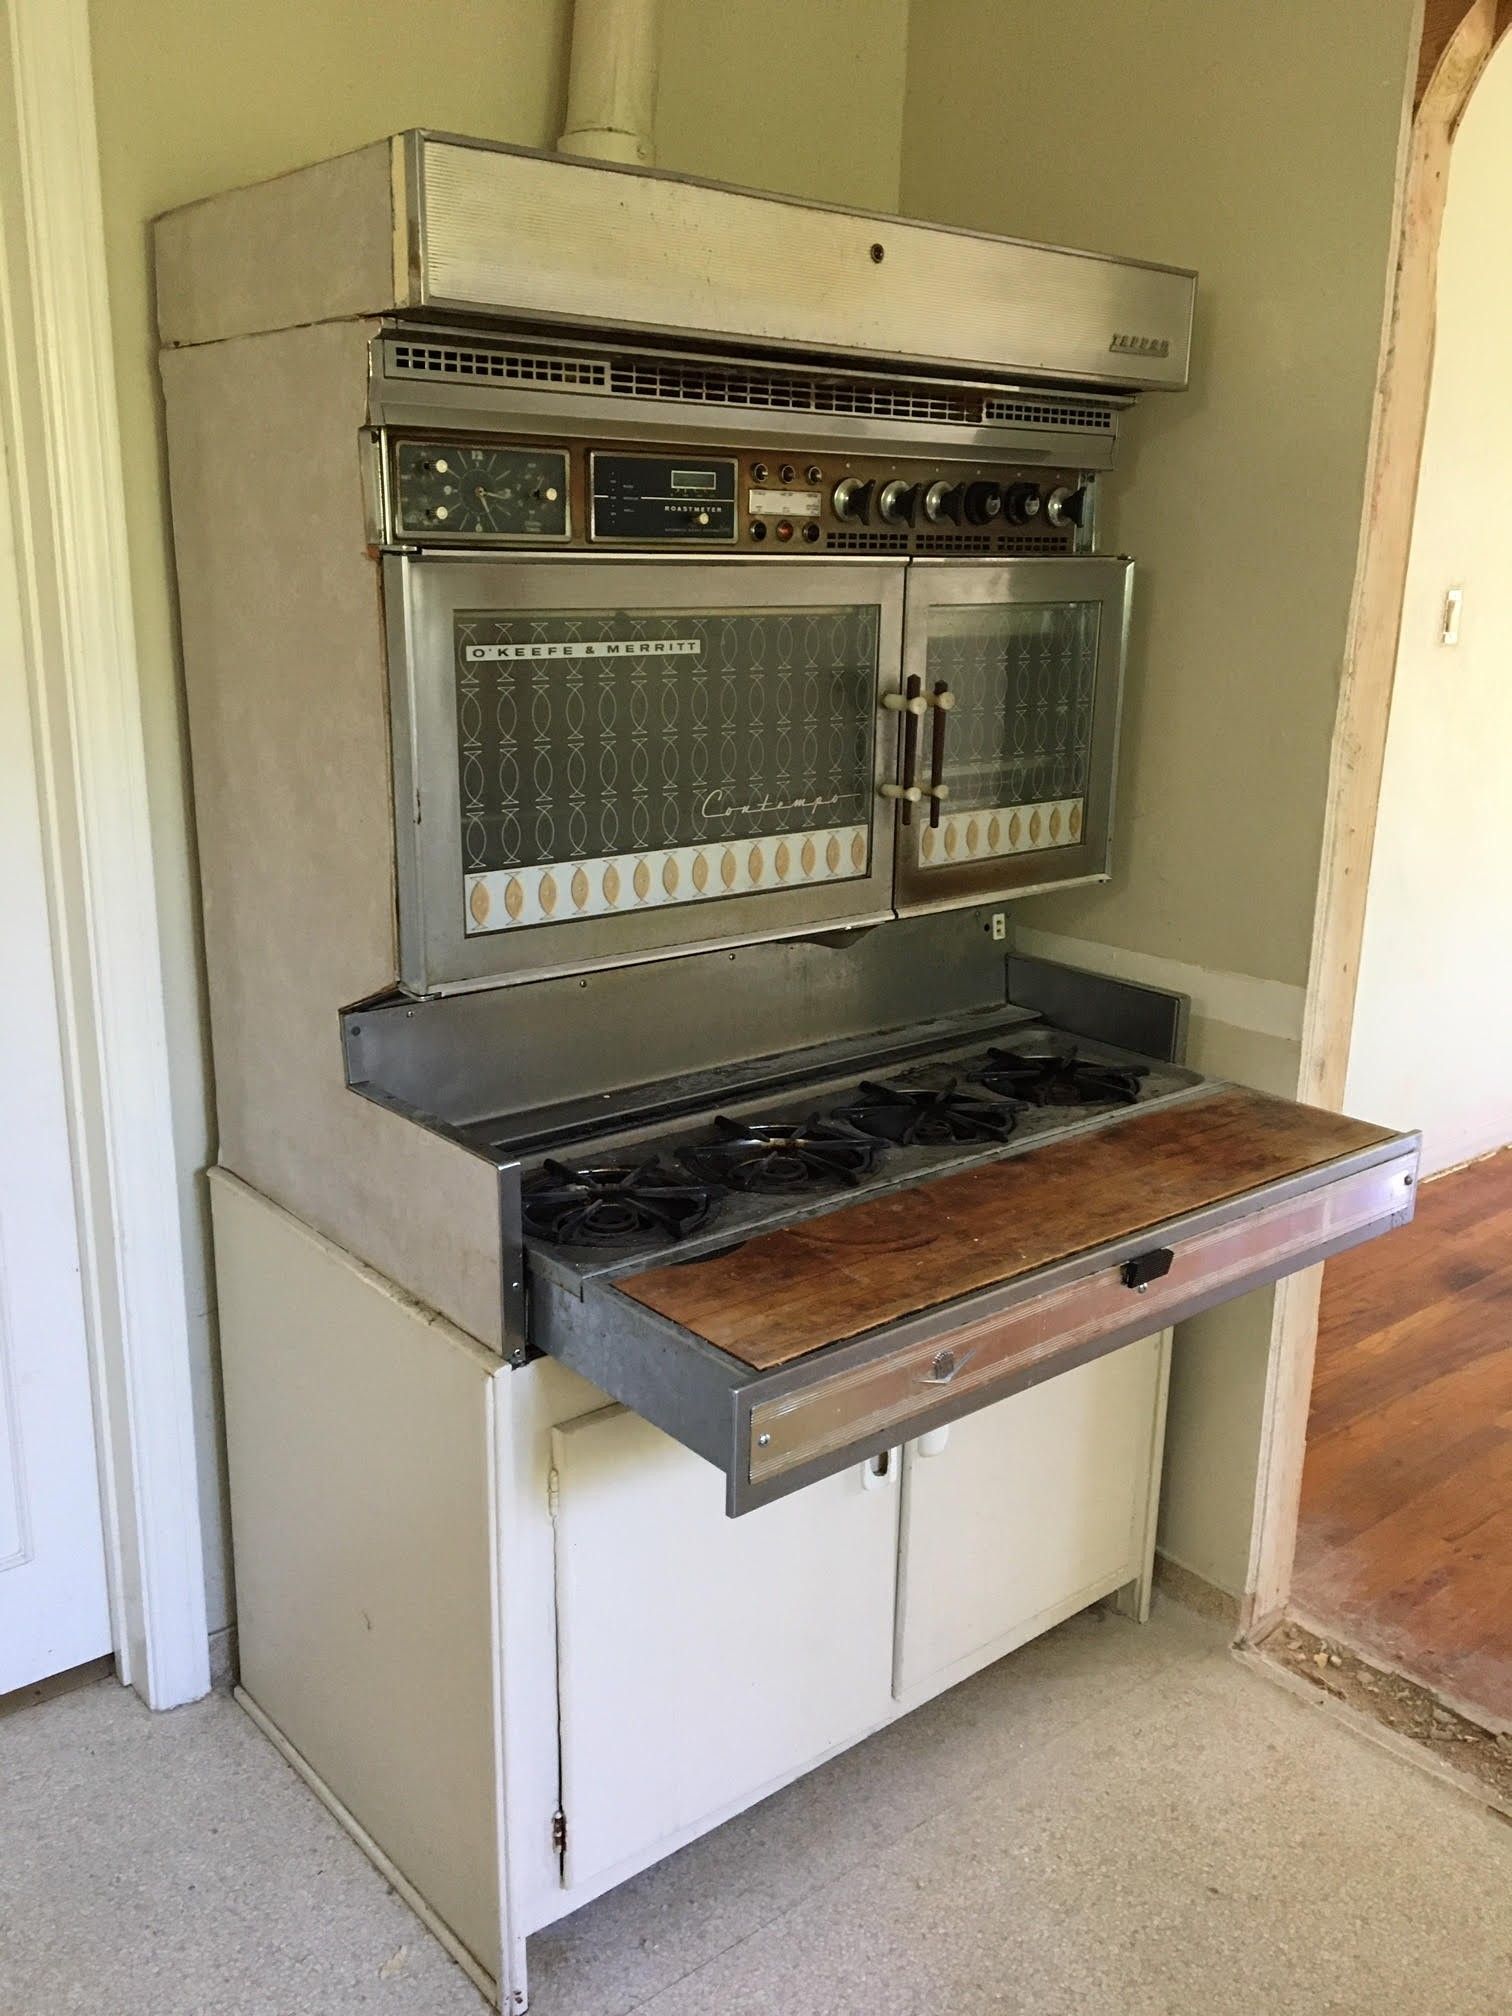 Vintage 1960s Stove/Oven